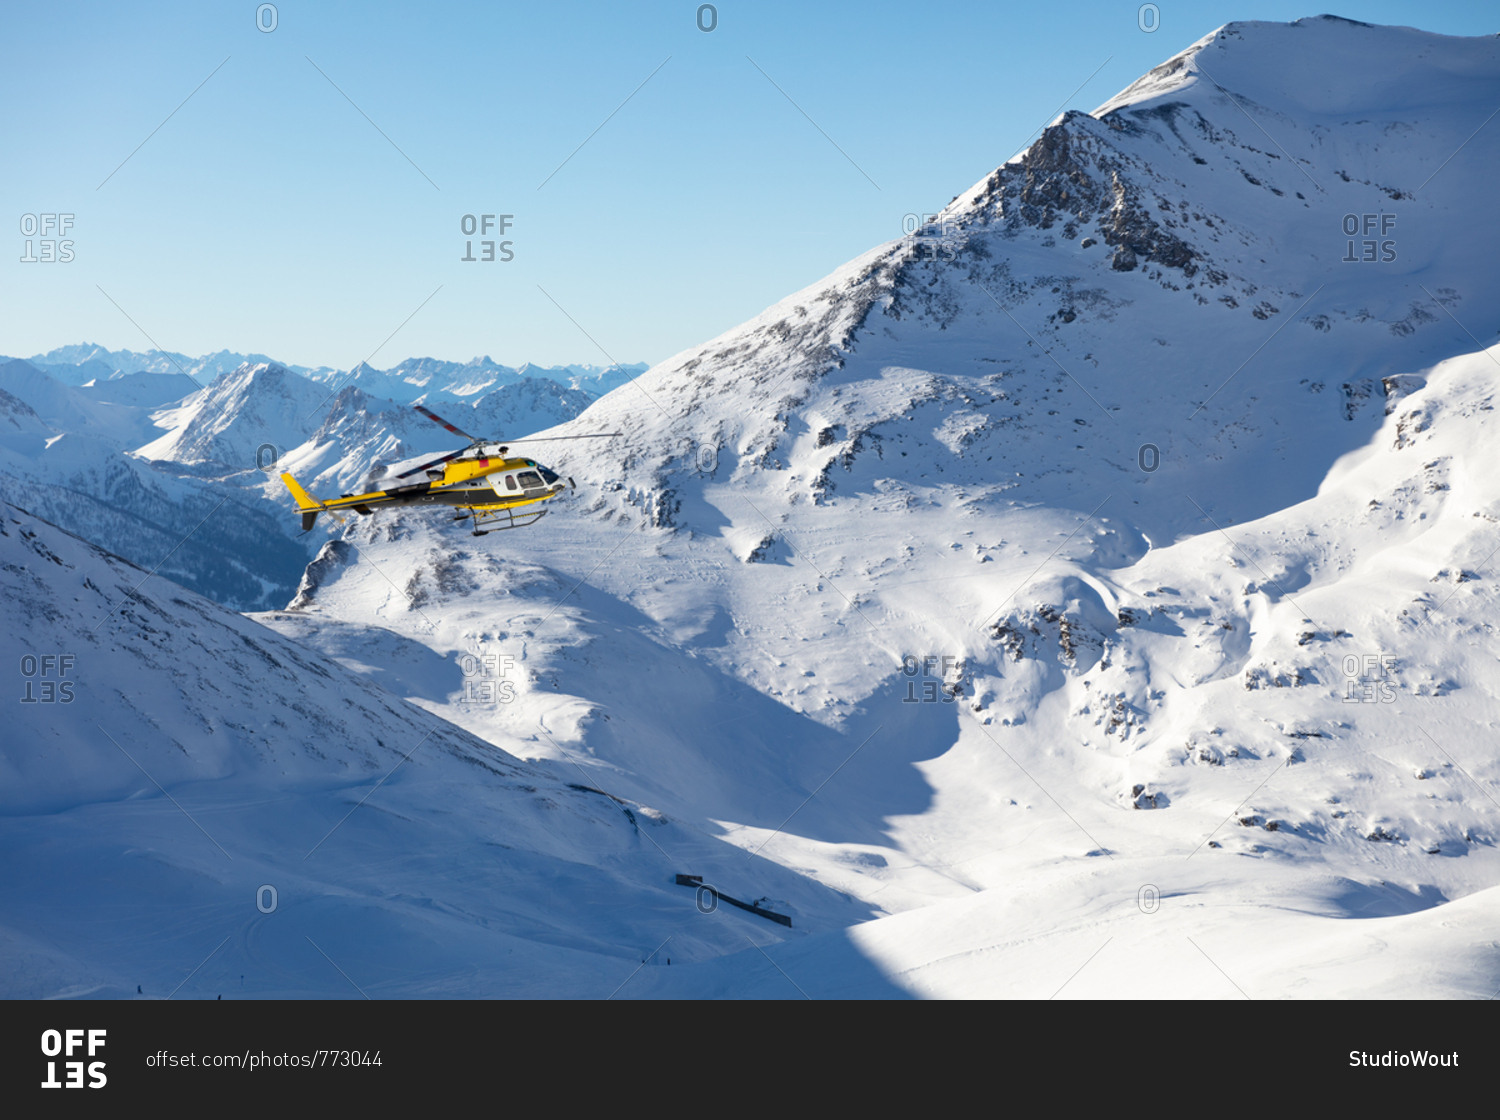 Rescue helicopter flying in a snowy landscape